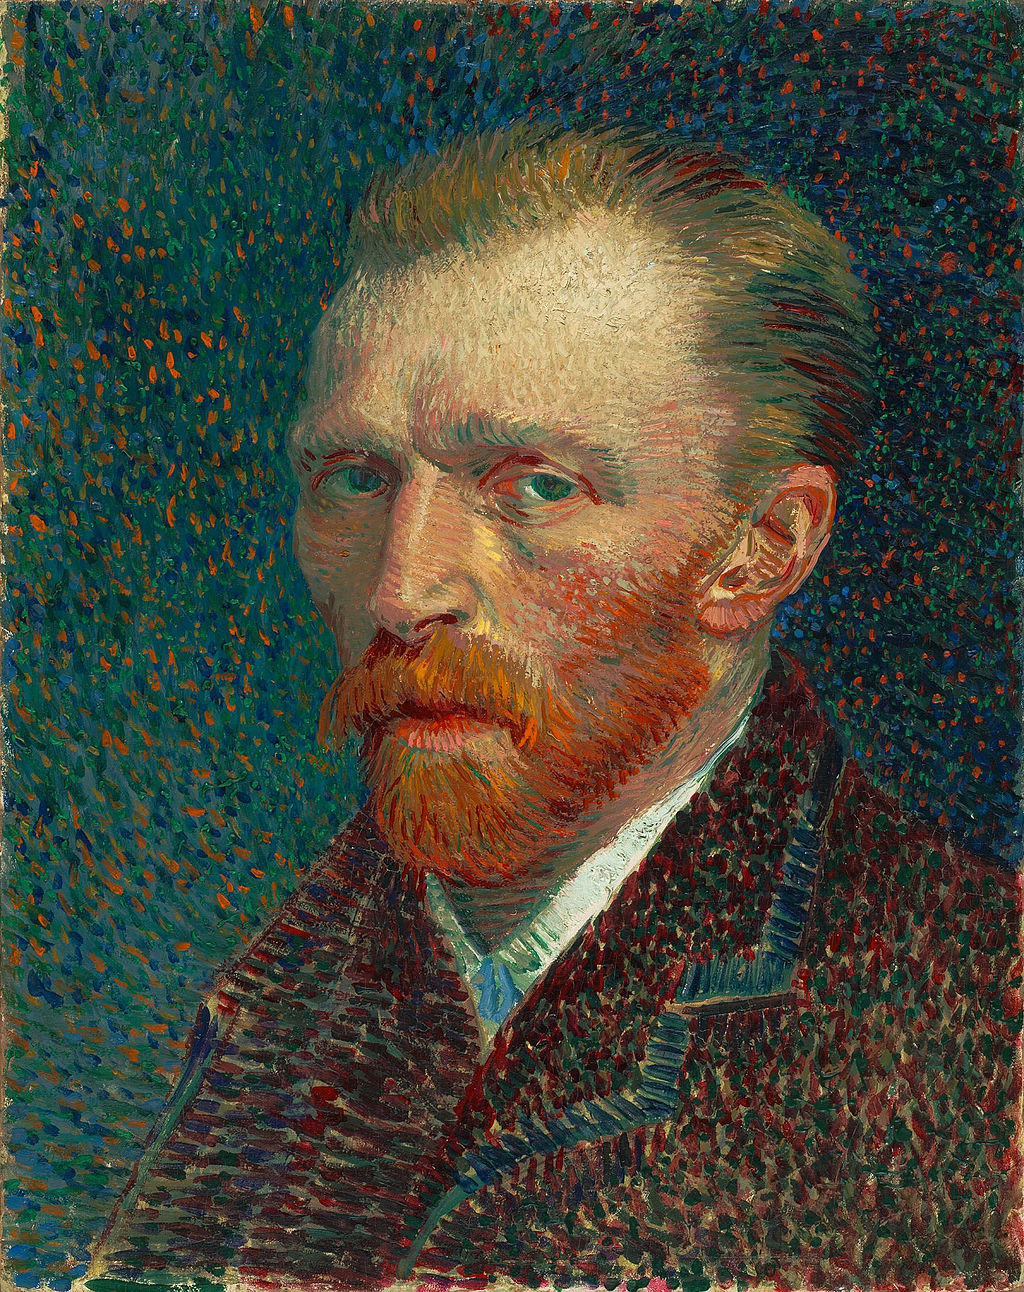 A darker tone self portrait by Van Gogh, he is looking sternly into the viewer.